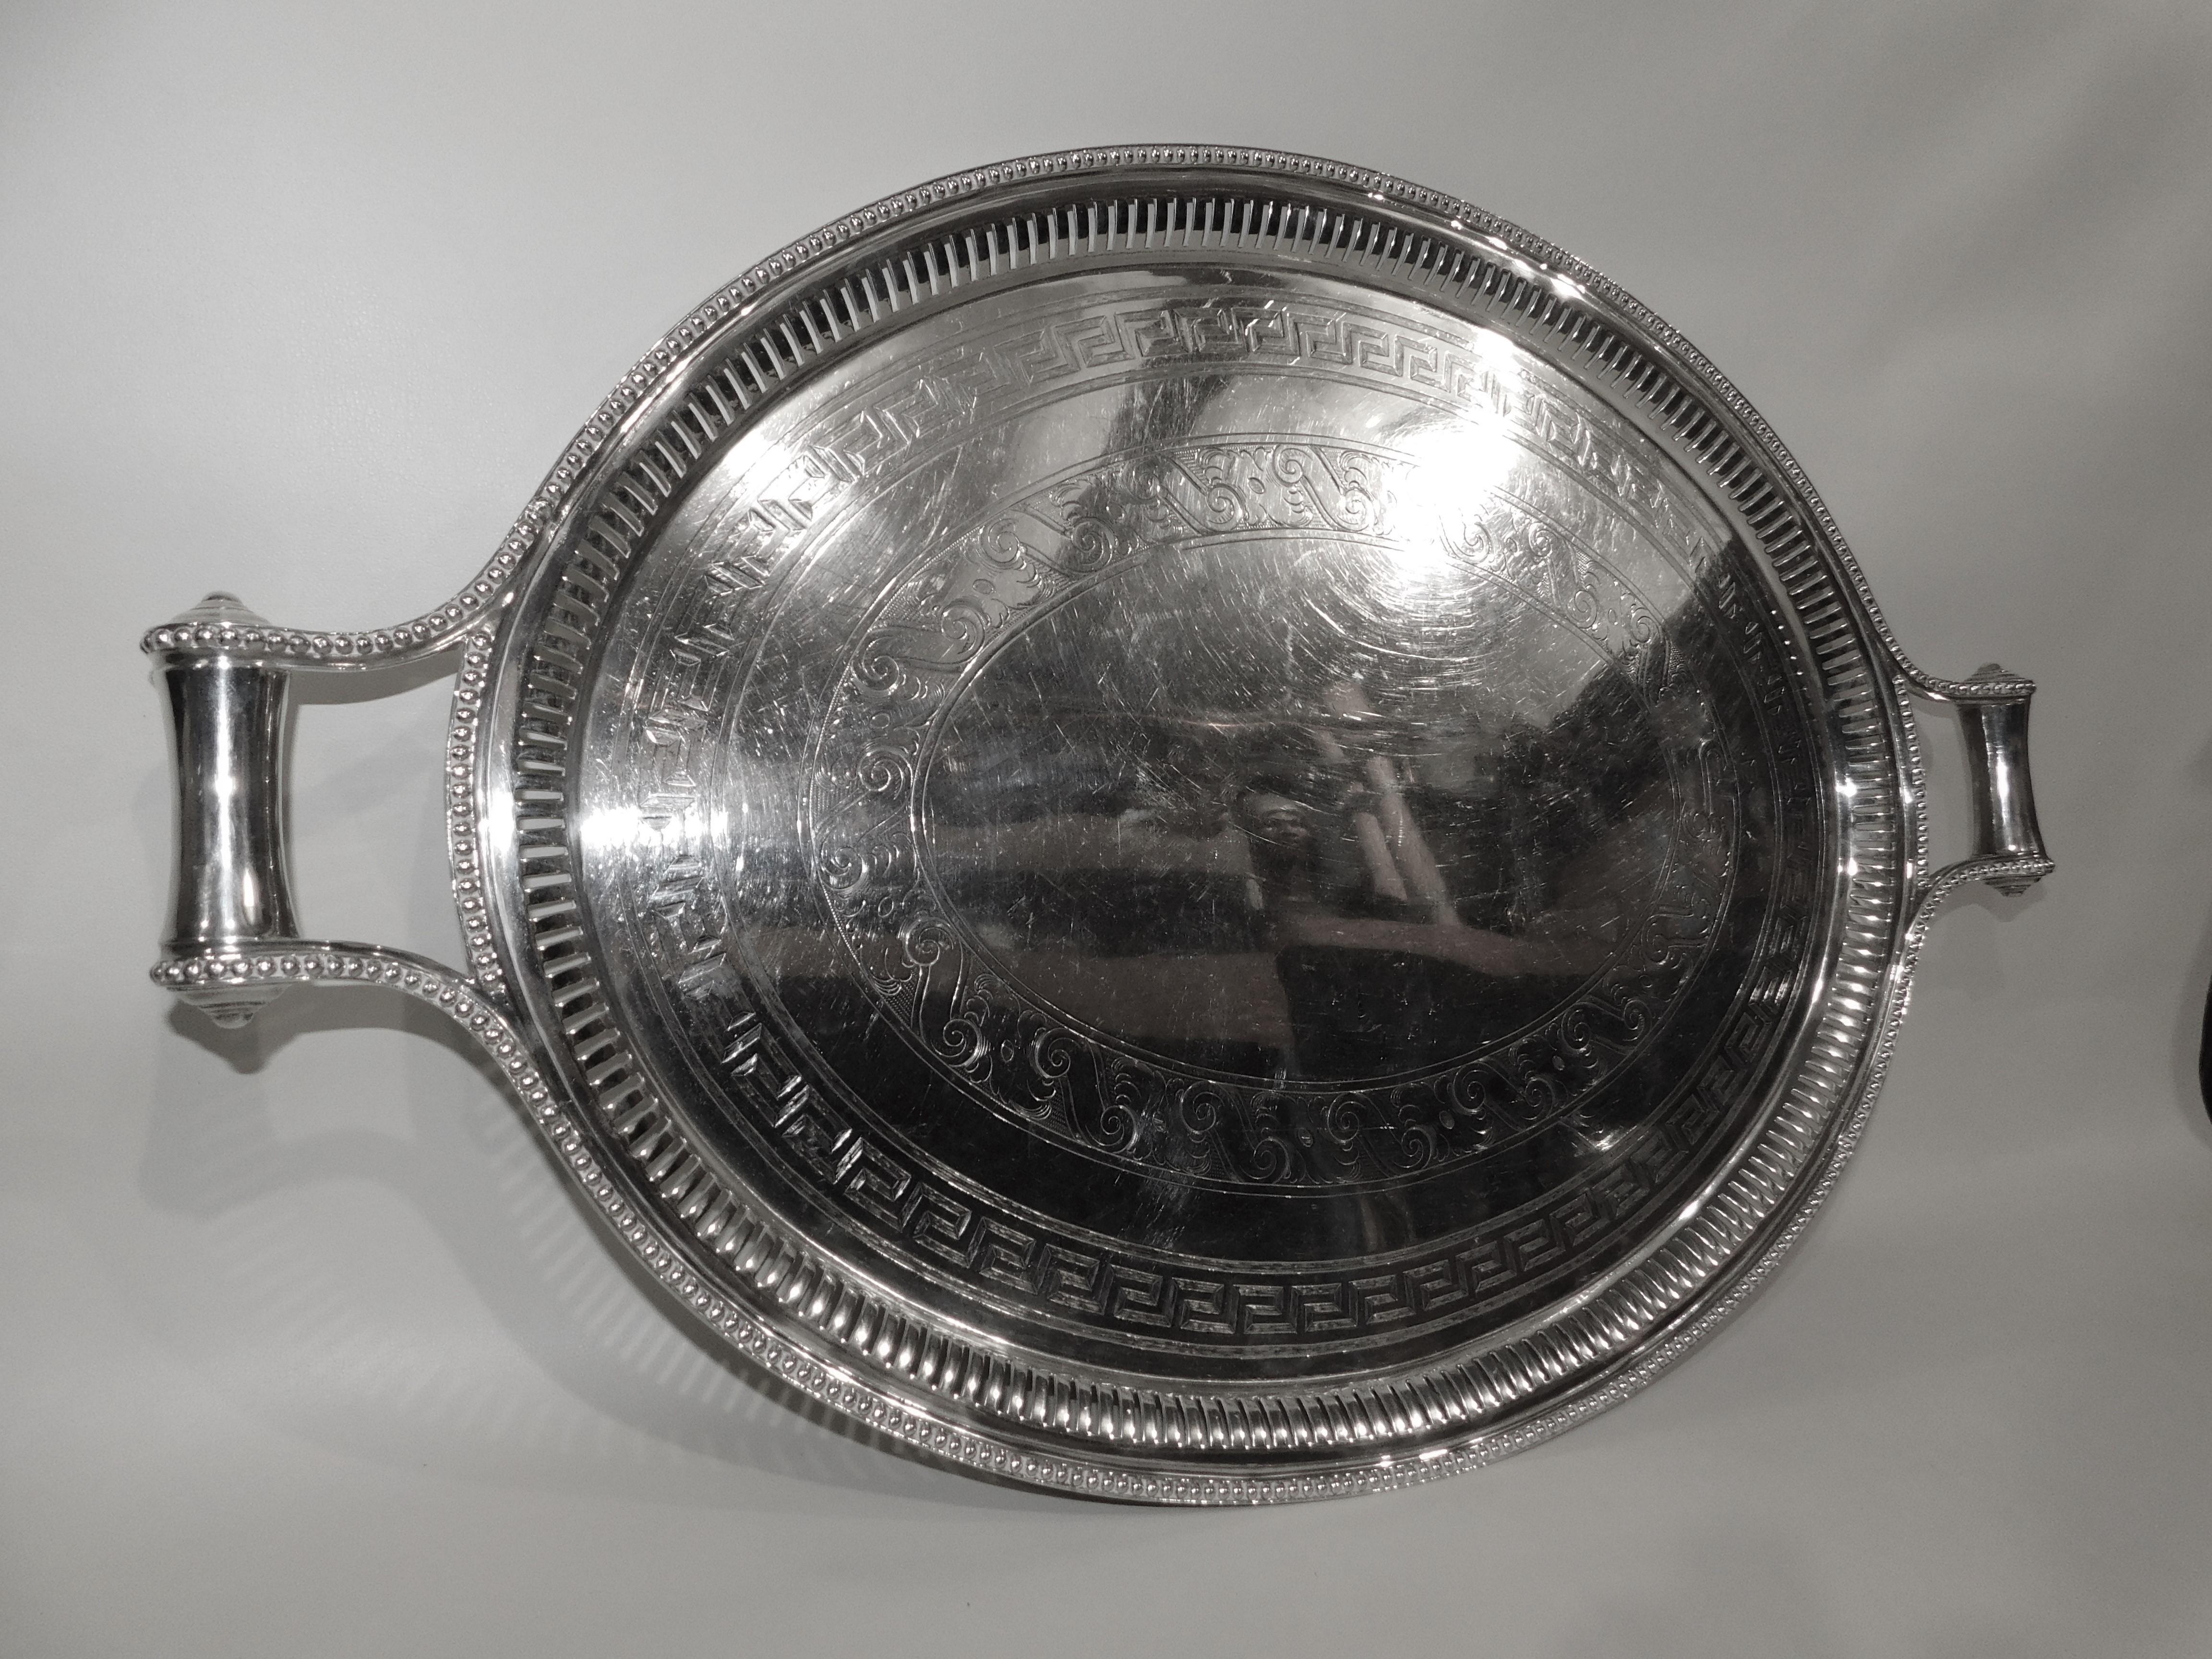 Large 19th century silver plated serving tray with ornate trim and handles.